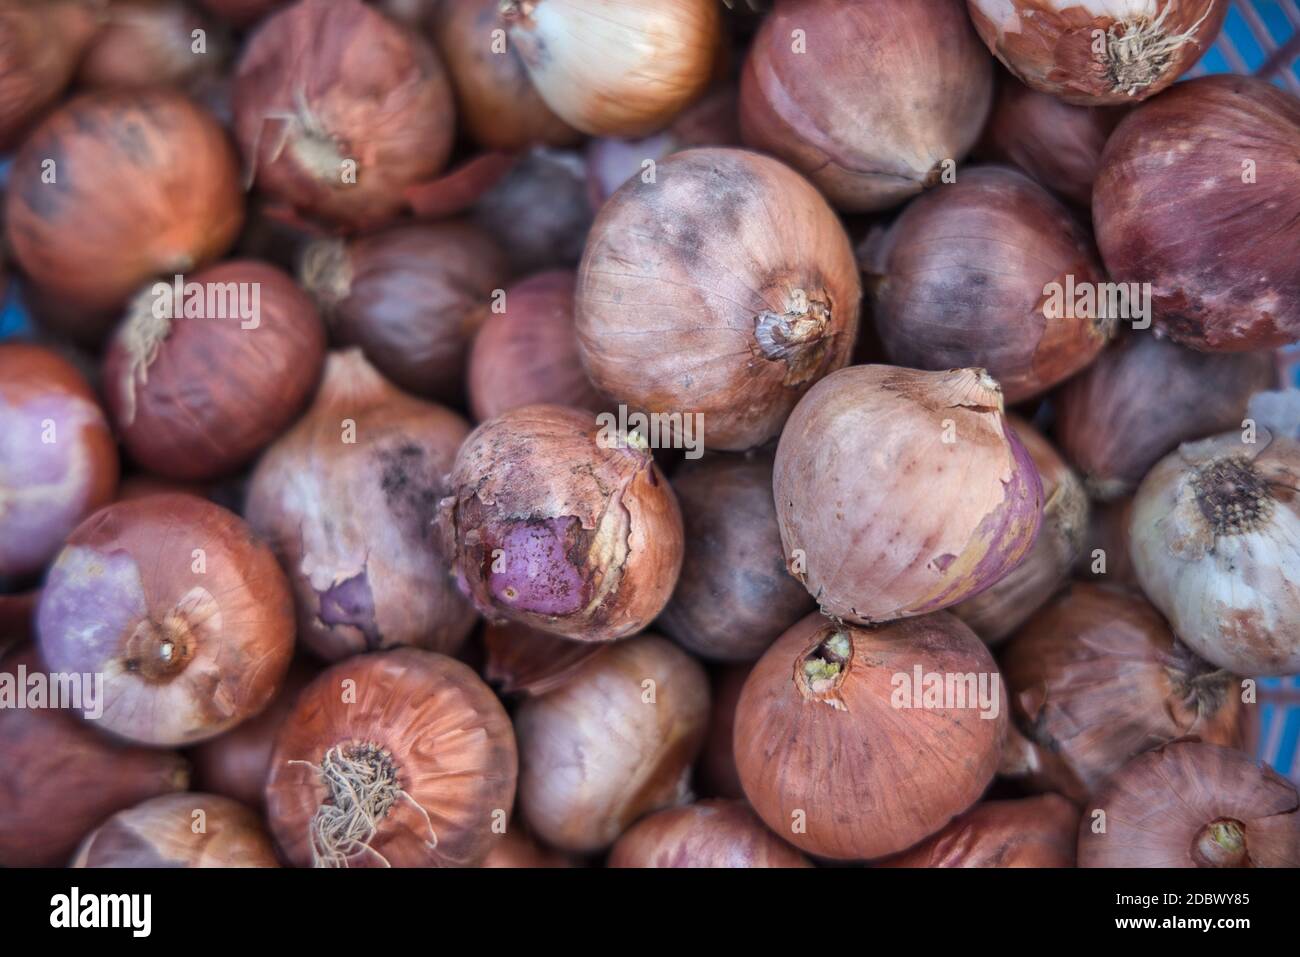 A pile of onions at a market in Hua Hin Thailand stacked and ready for sale. The onions are natural and fresh. Stock Photo